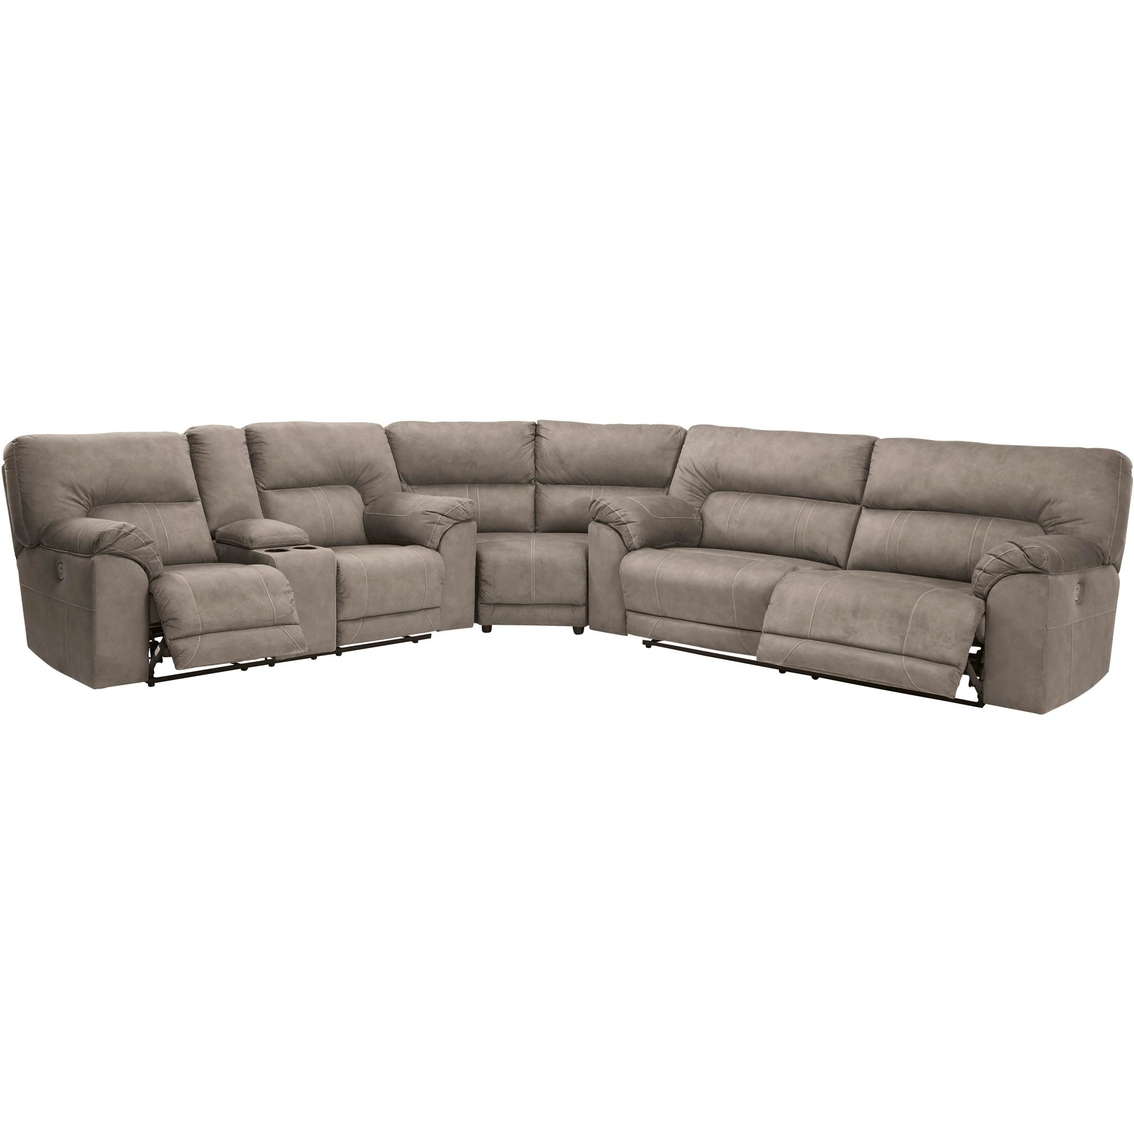 Signature Design by Ashley Cavalcade Power Reclining 4 pc. Sectional with Recliner - Image 2 of 9